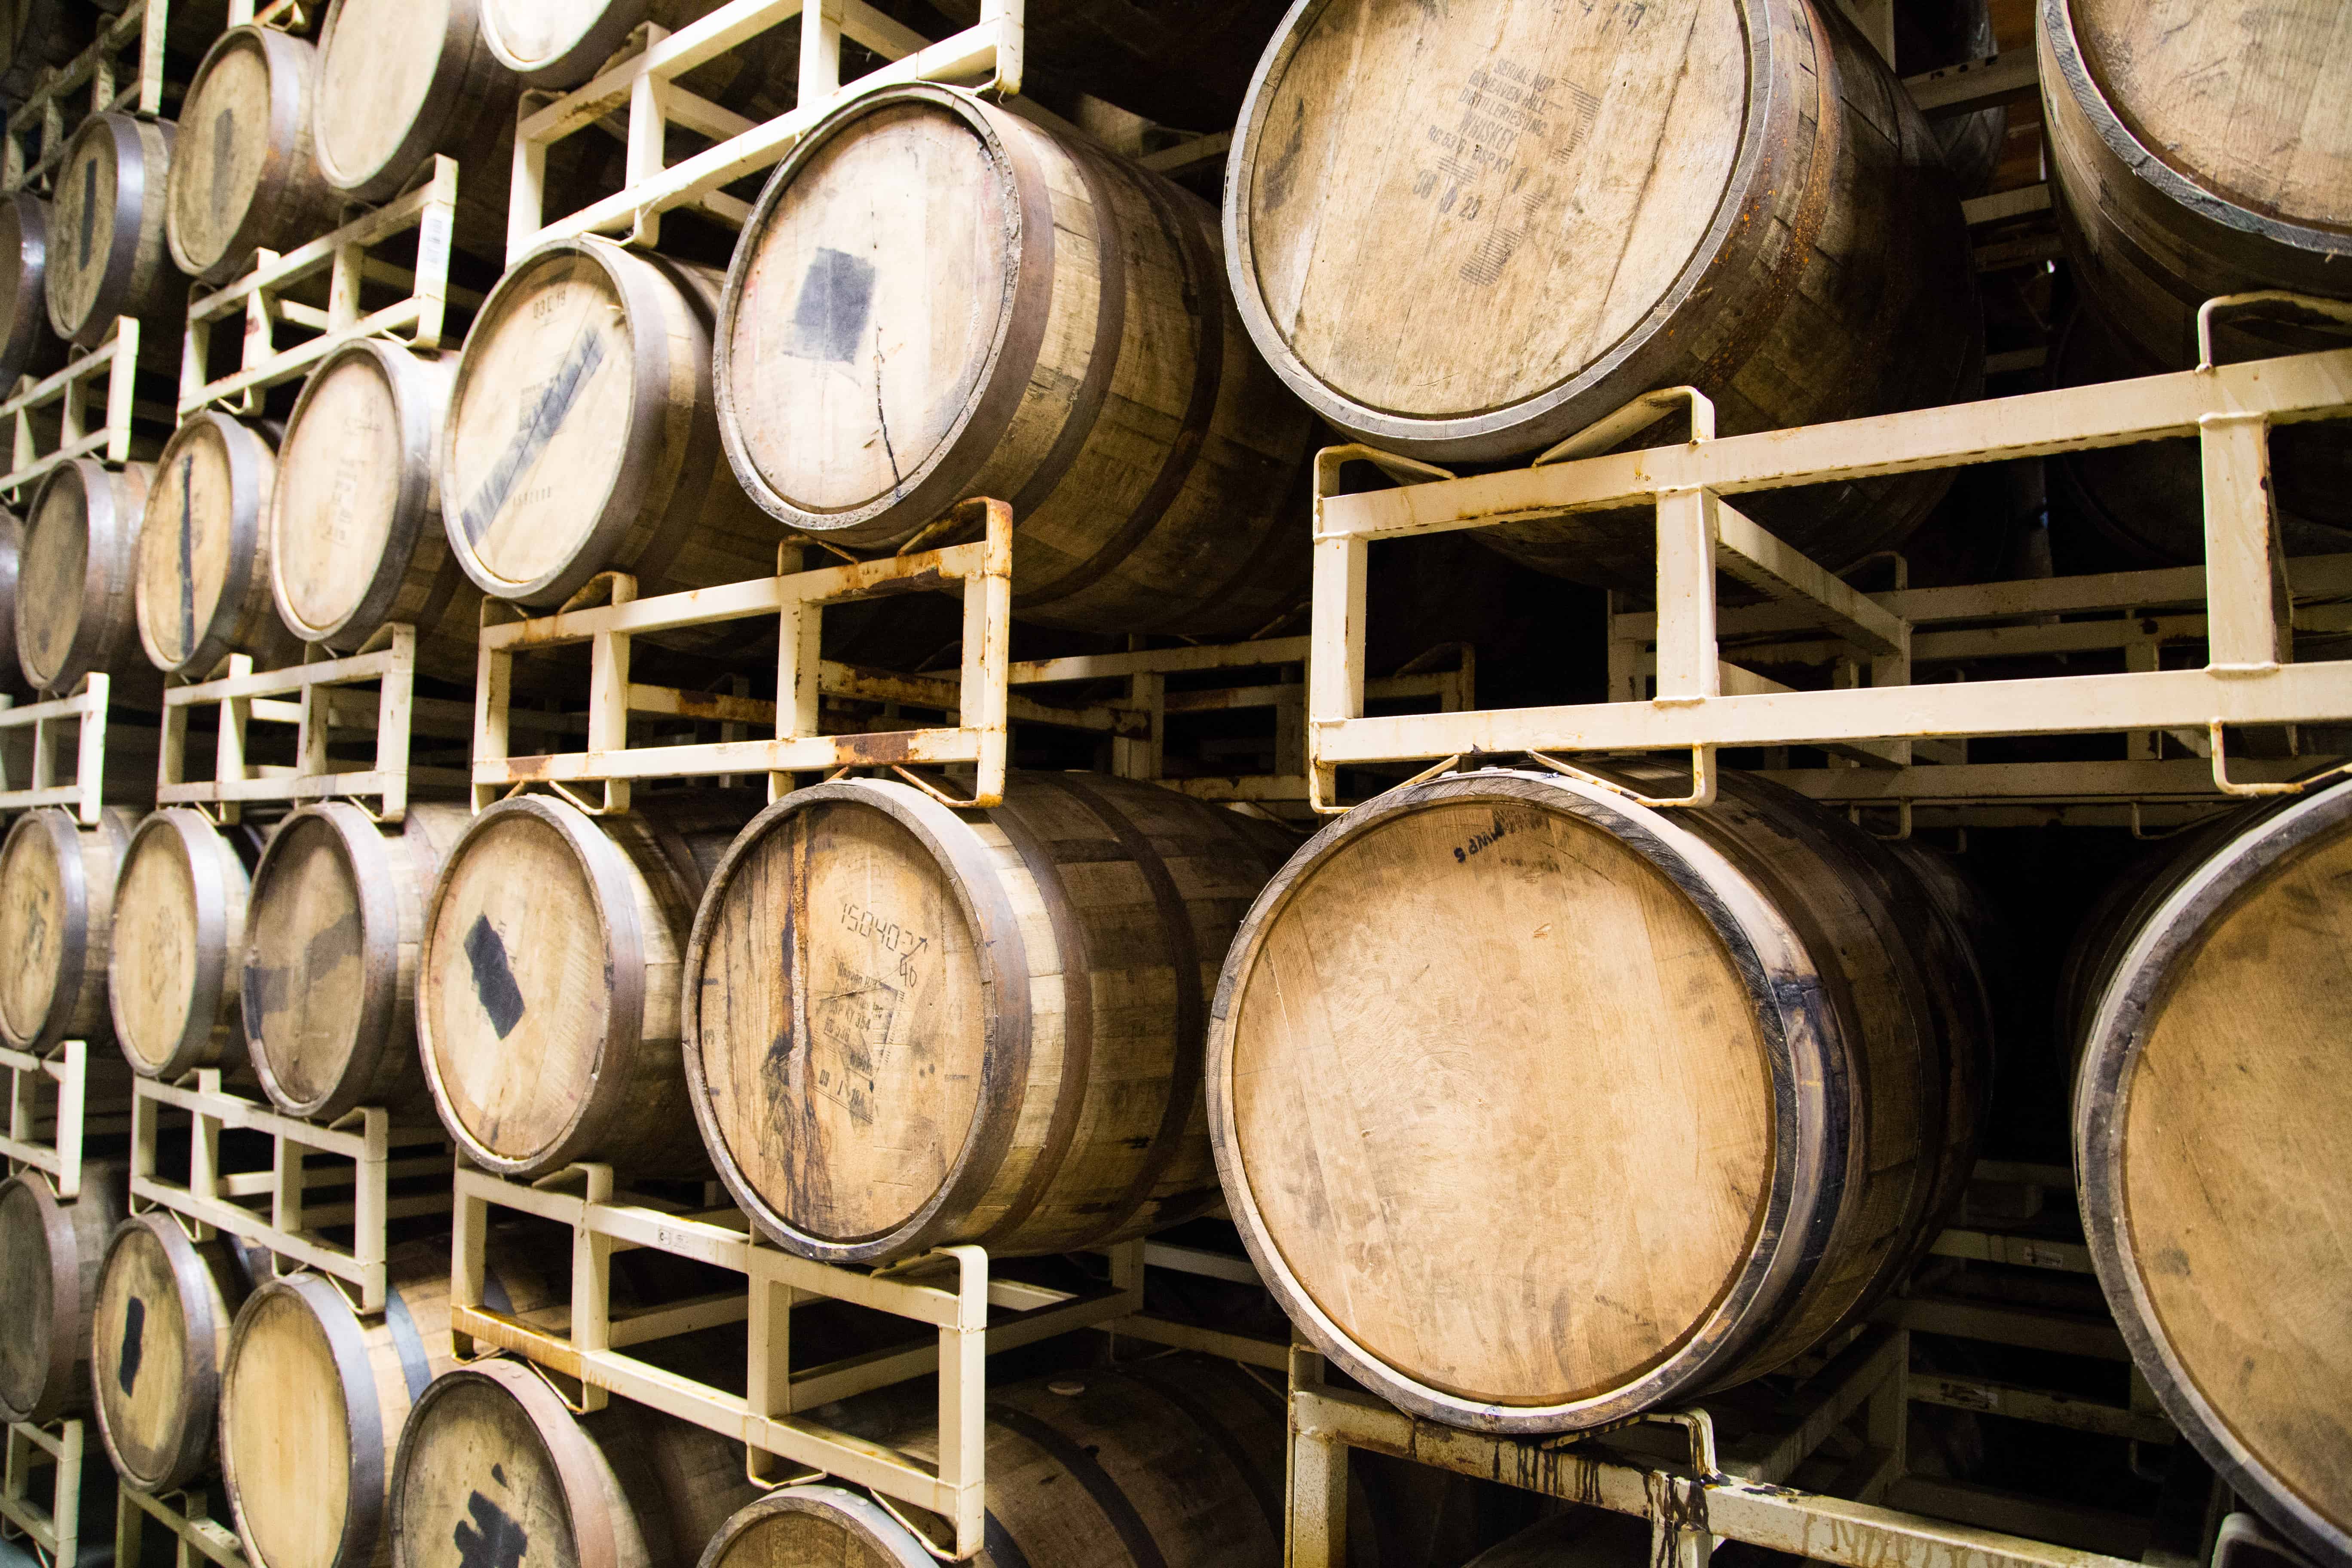 A Tale of Two Coopers: Barrel-Aging & Our 27th Anniversary